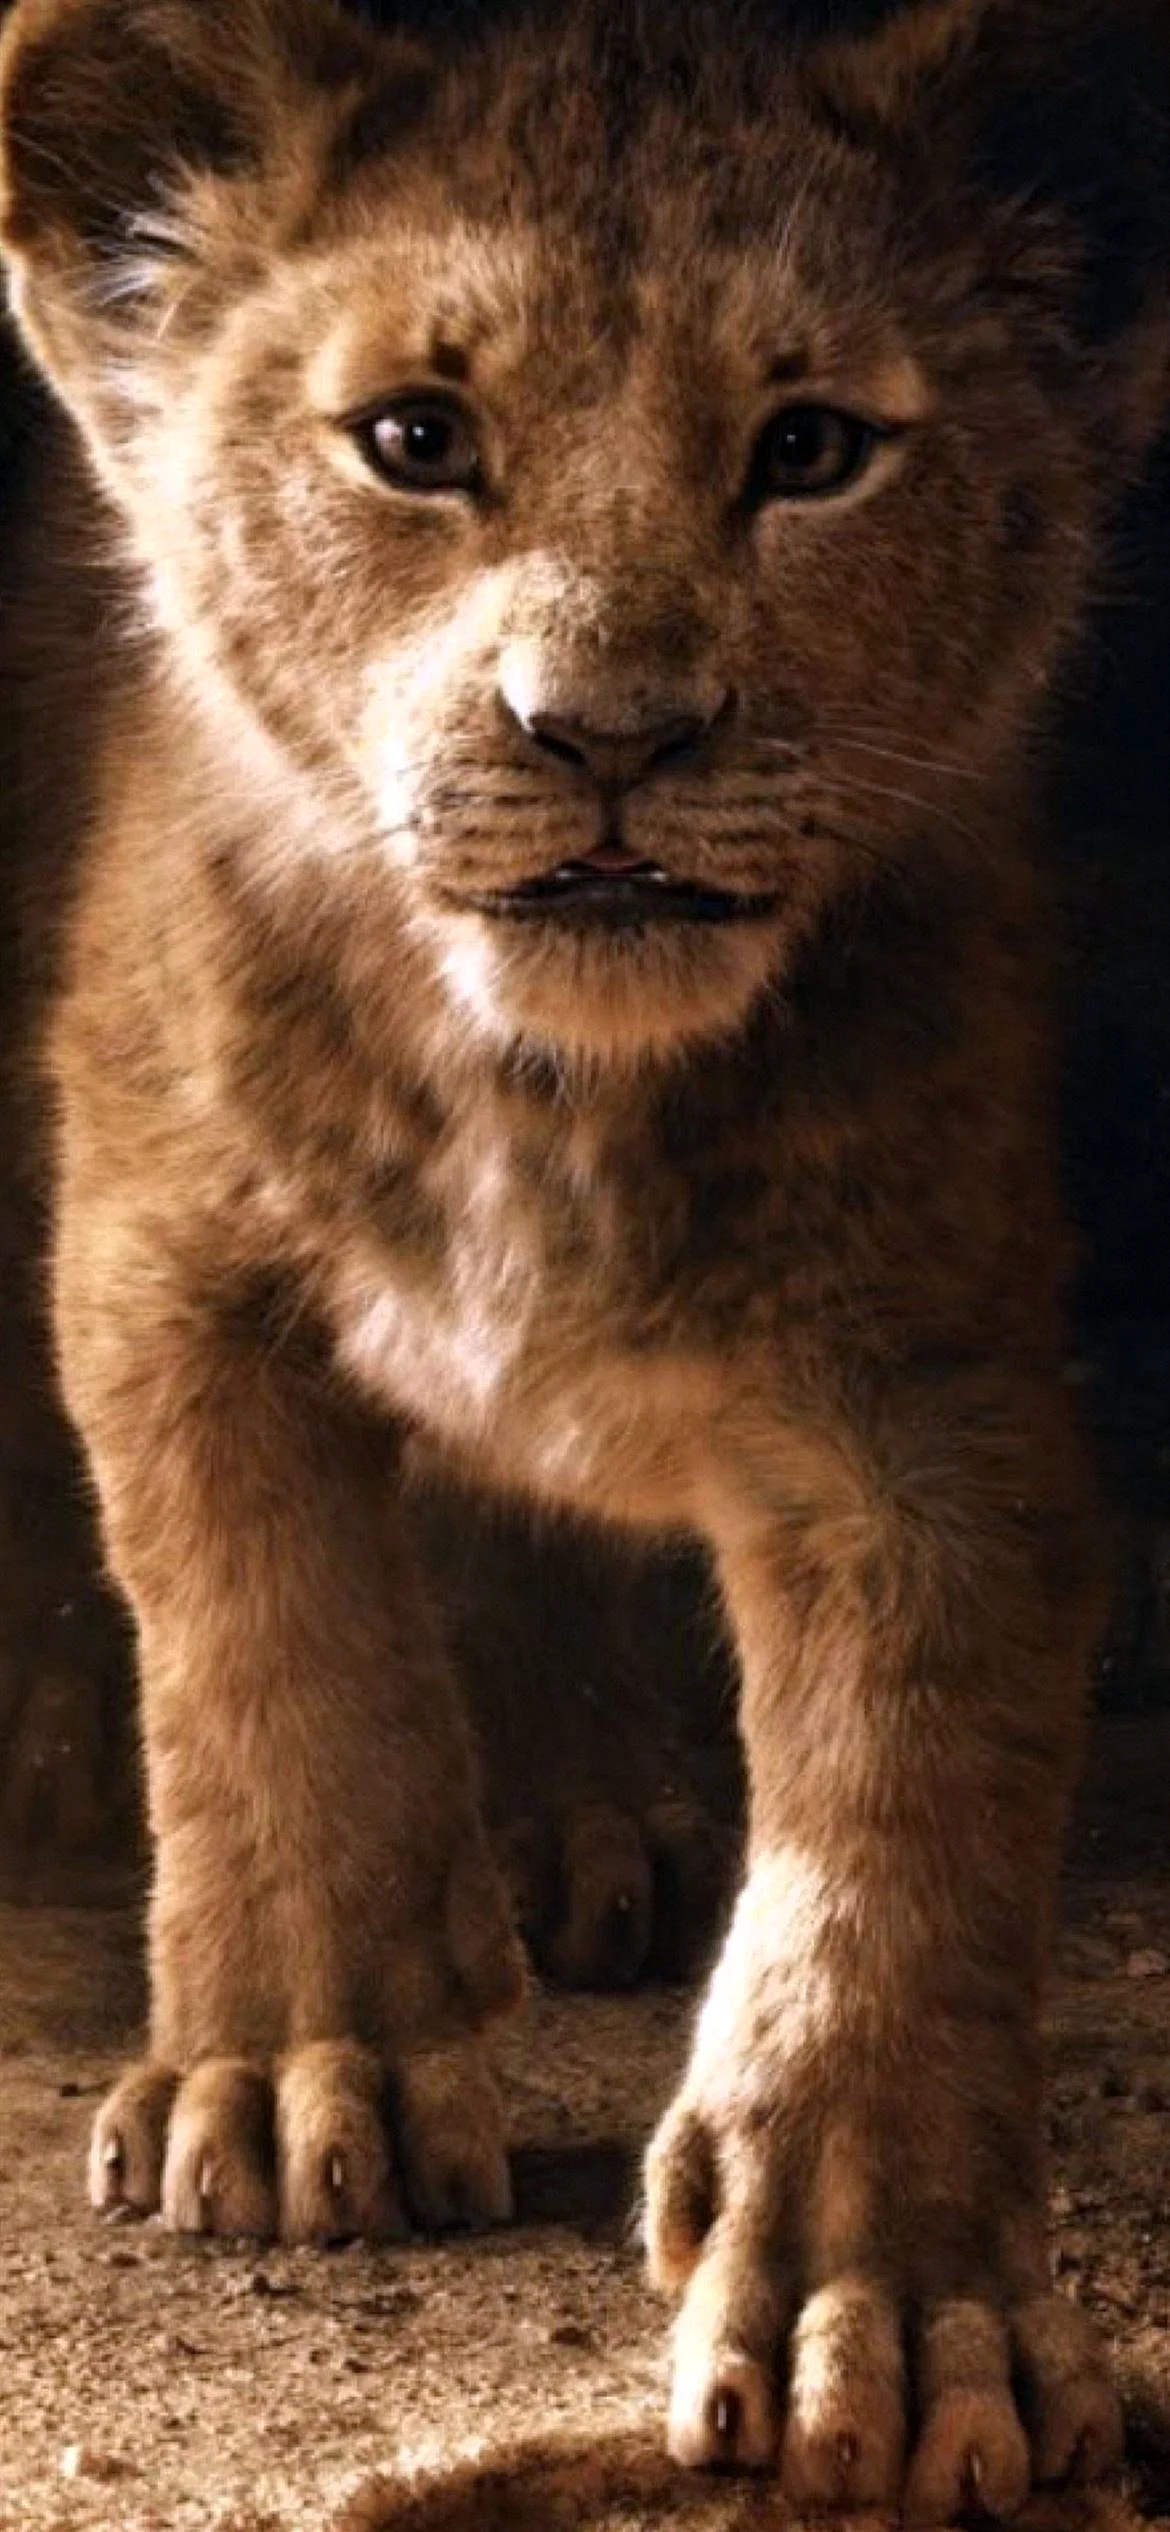 The Lion King 2019 Wallpaper for iPhone 12